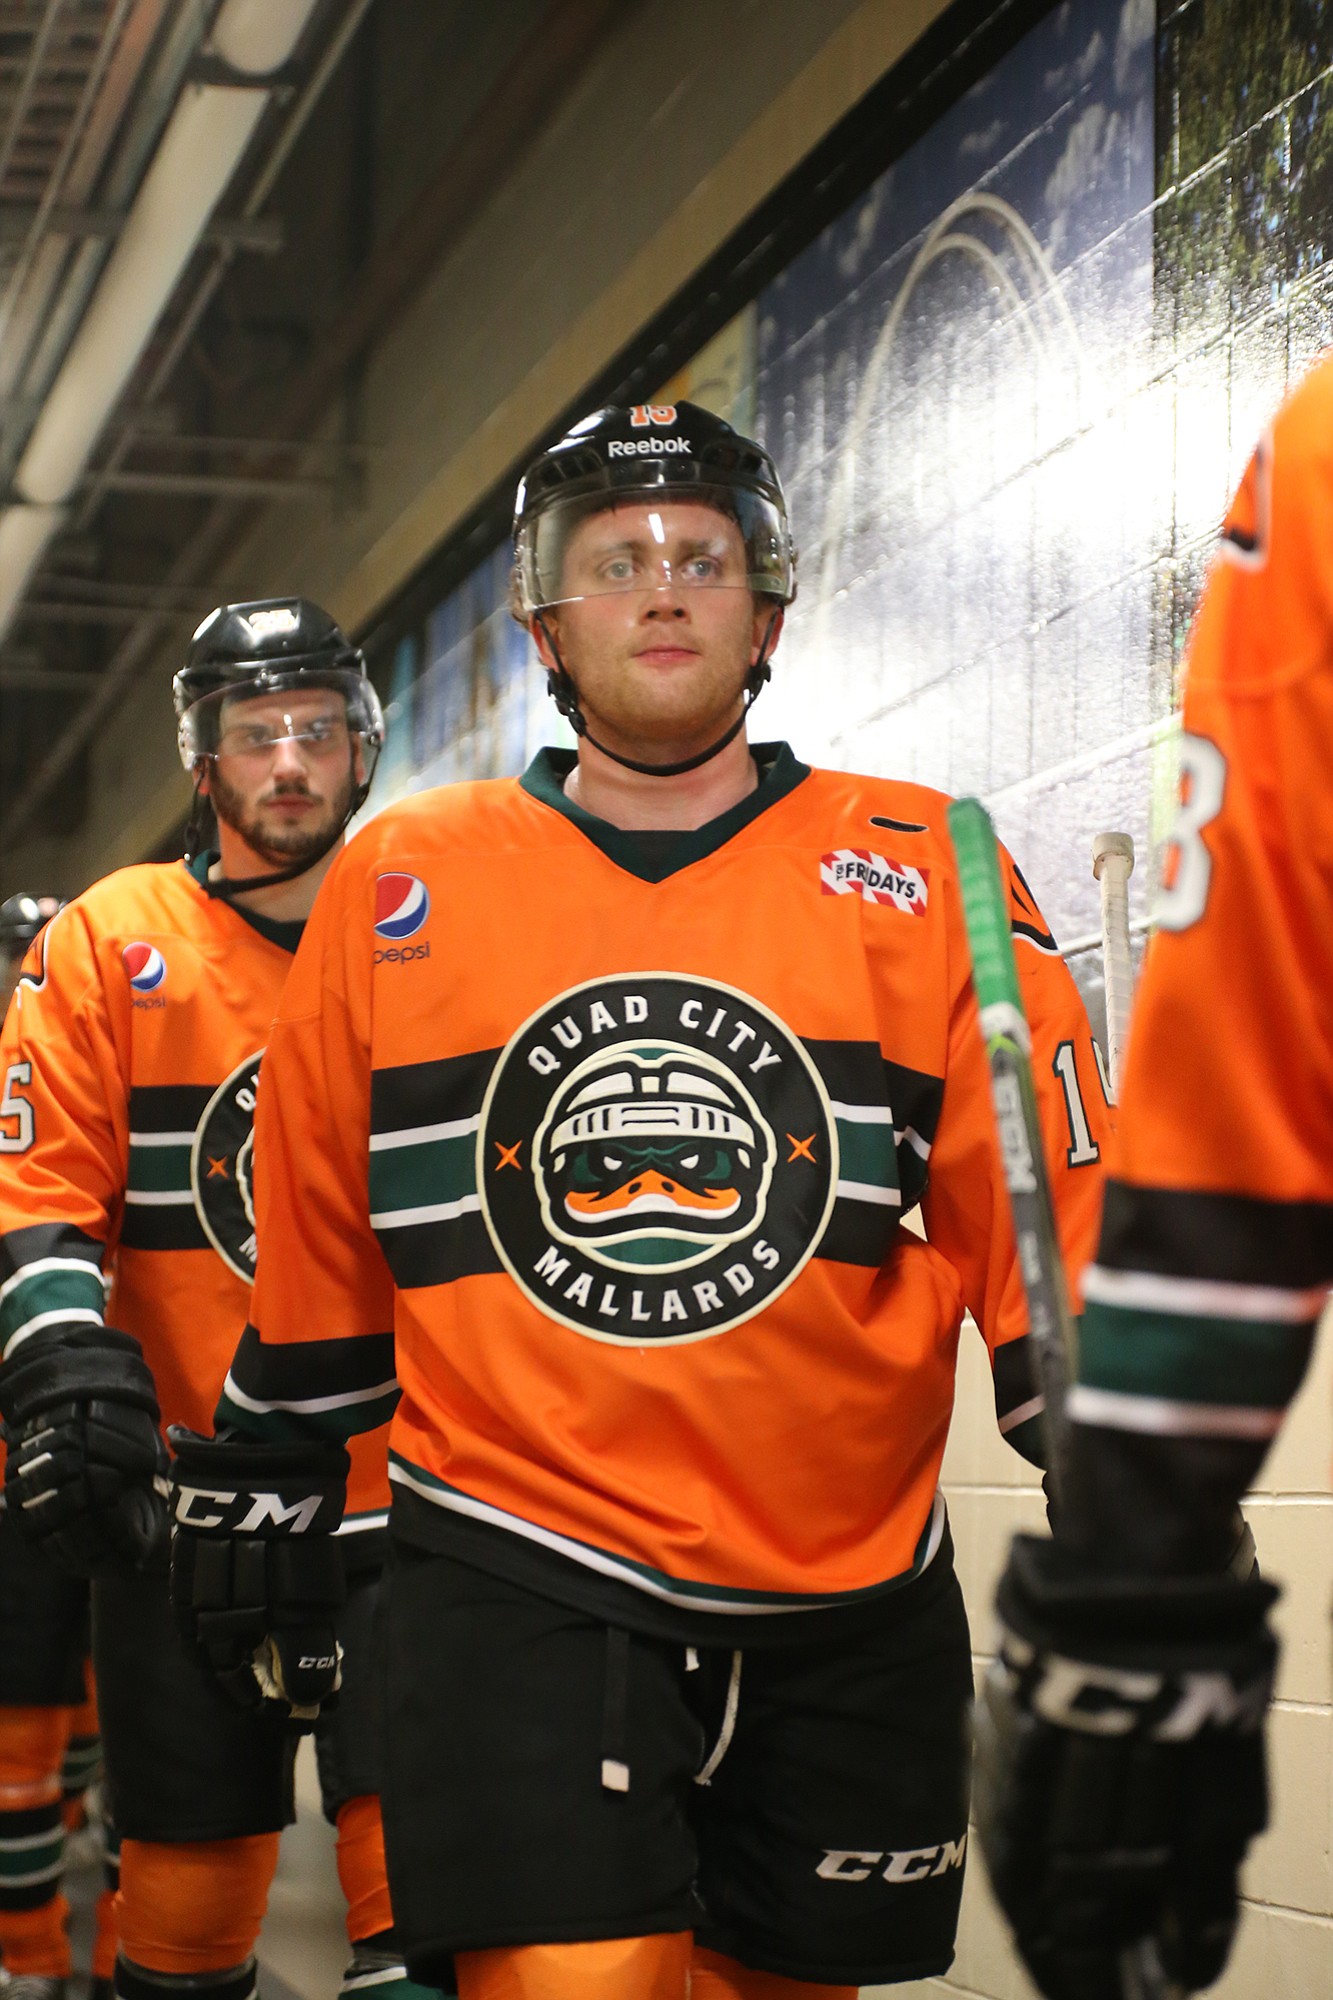 Vancouver native Austin Coldwell started his professional hockey career this spring with the Quad City Mallards of the East Coast Hockey League.